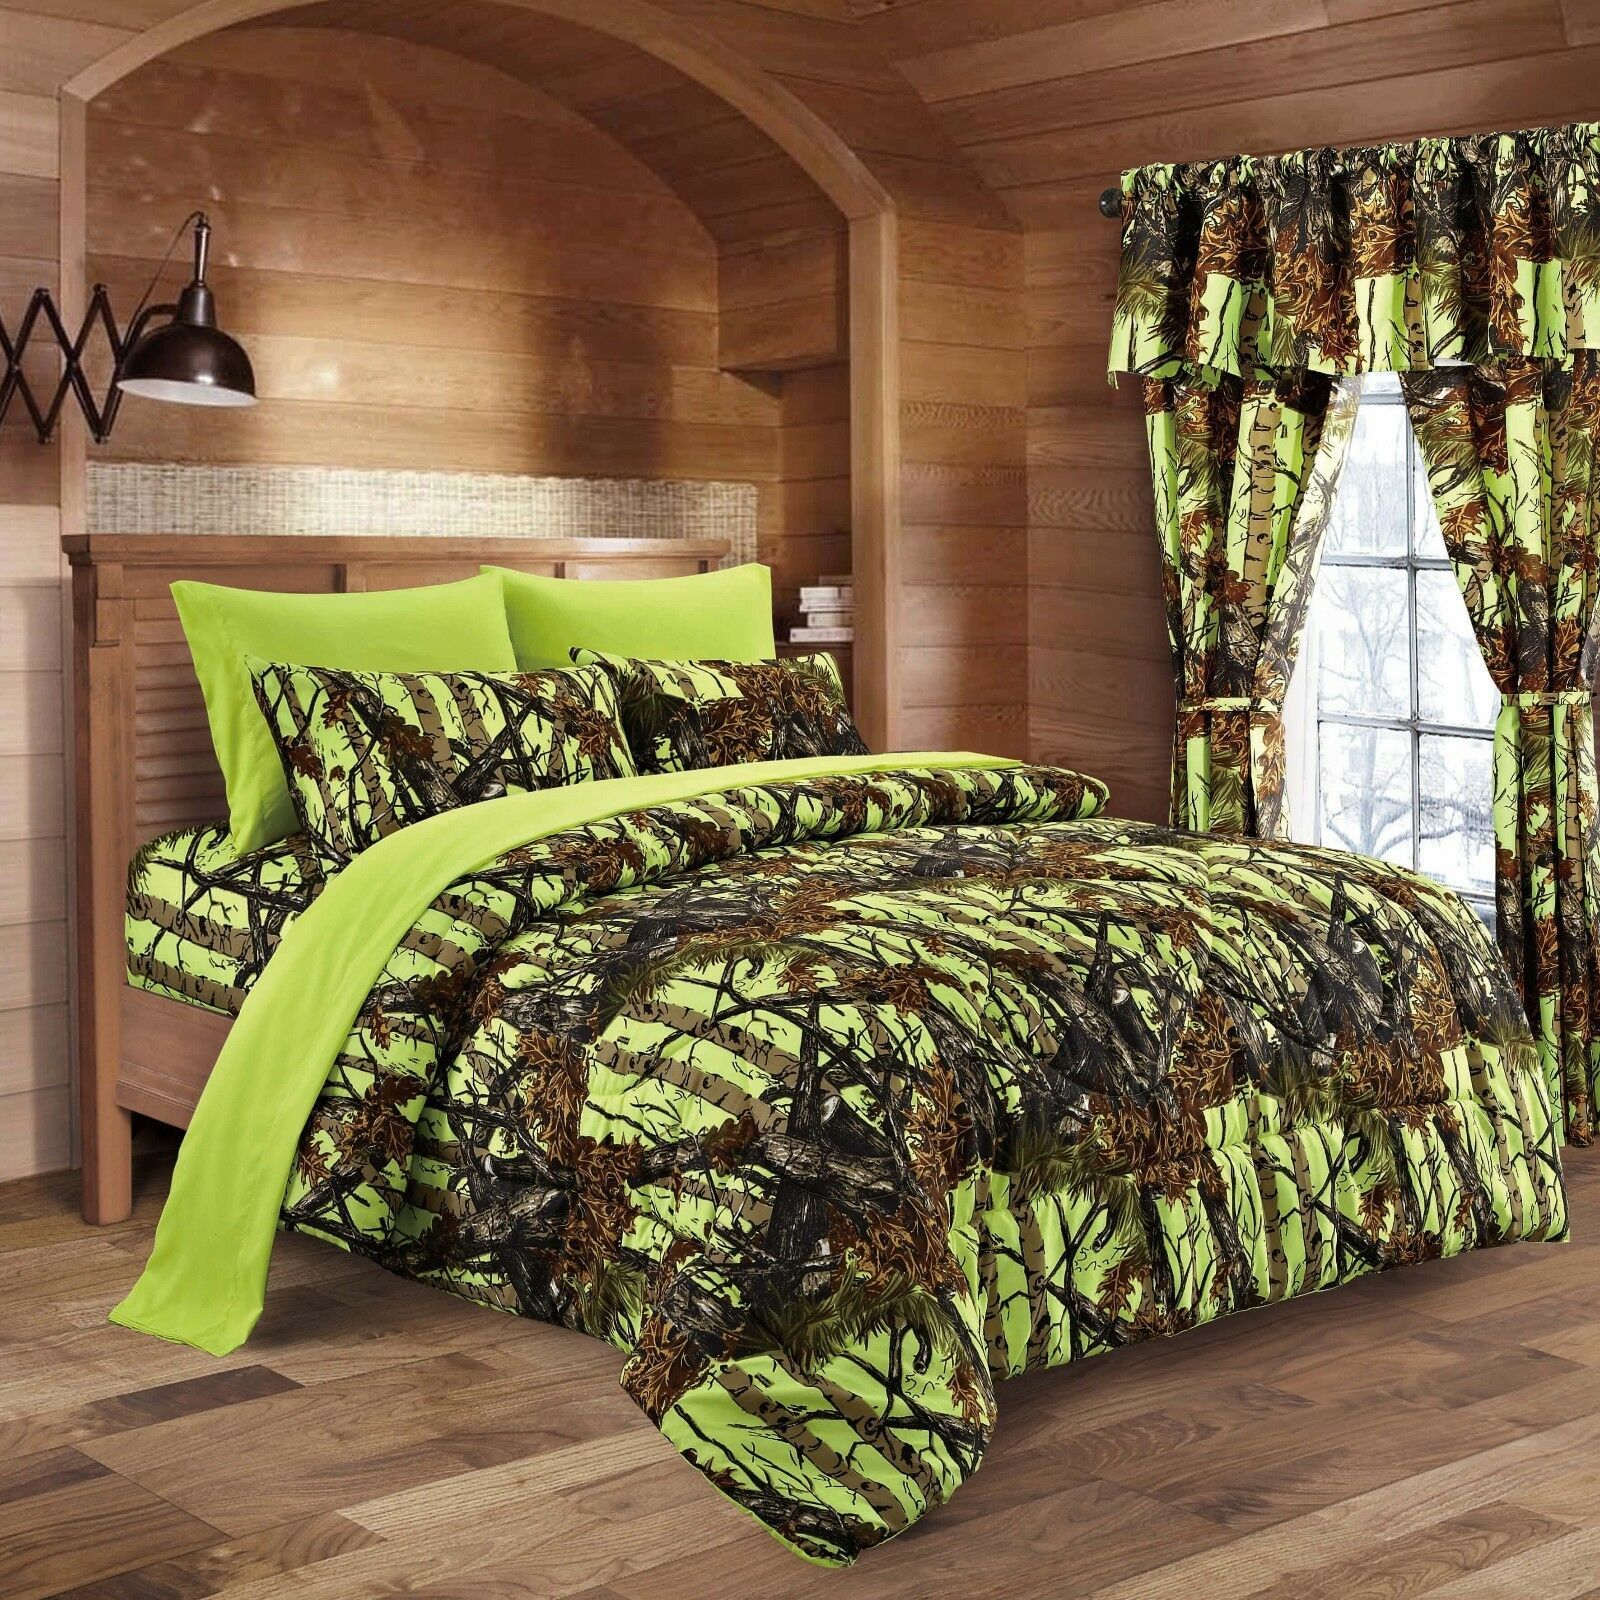 9 PC COMFORTER SET with SHEETS PILLOWCASES LIME CAMO KING CAMOUFLAGE NEON YELLOW - $97.90